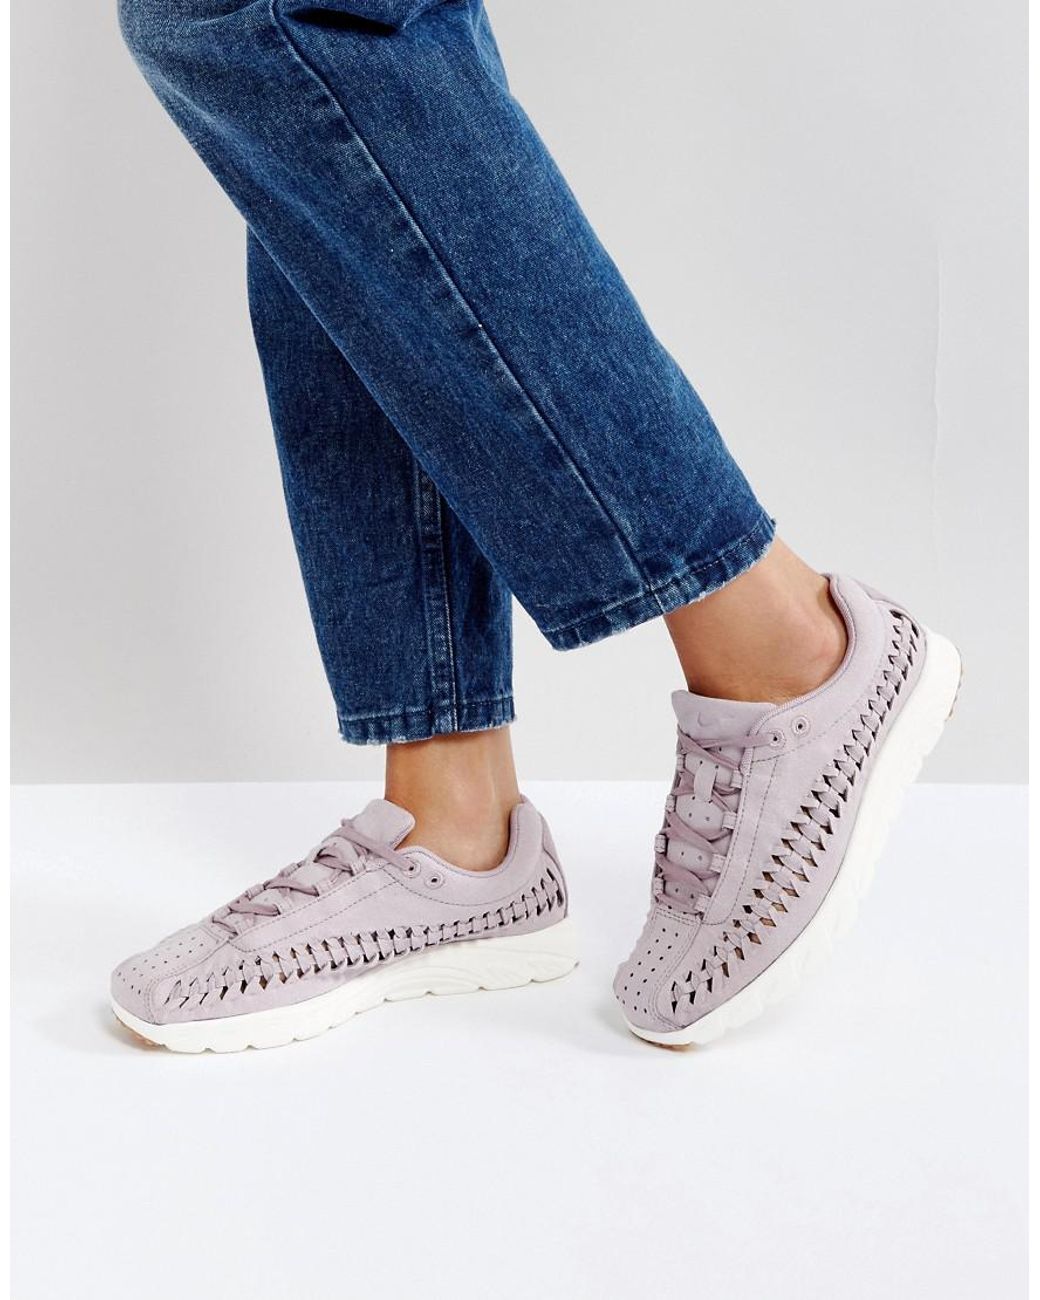 Nike Mayfly Woven Trainers In Lilac in Purple | Lyst UK